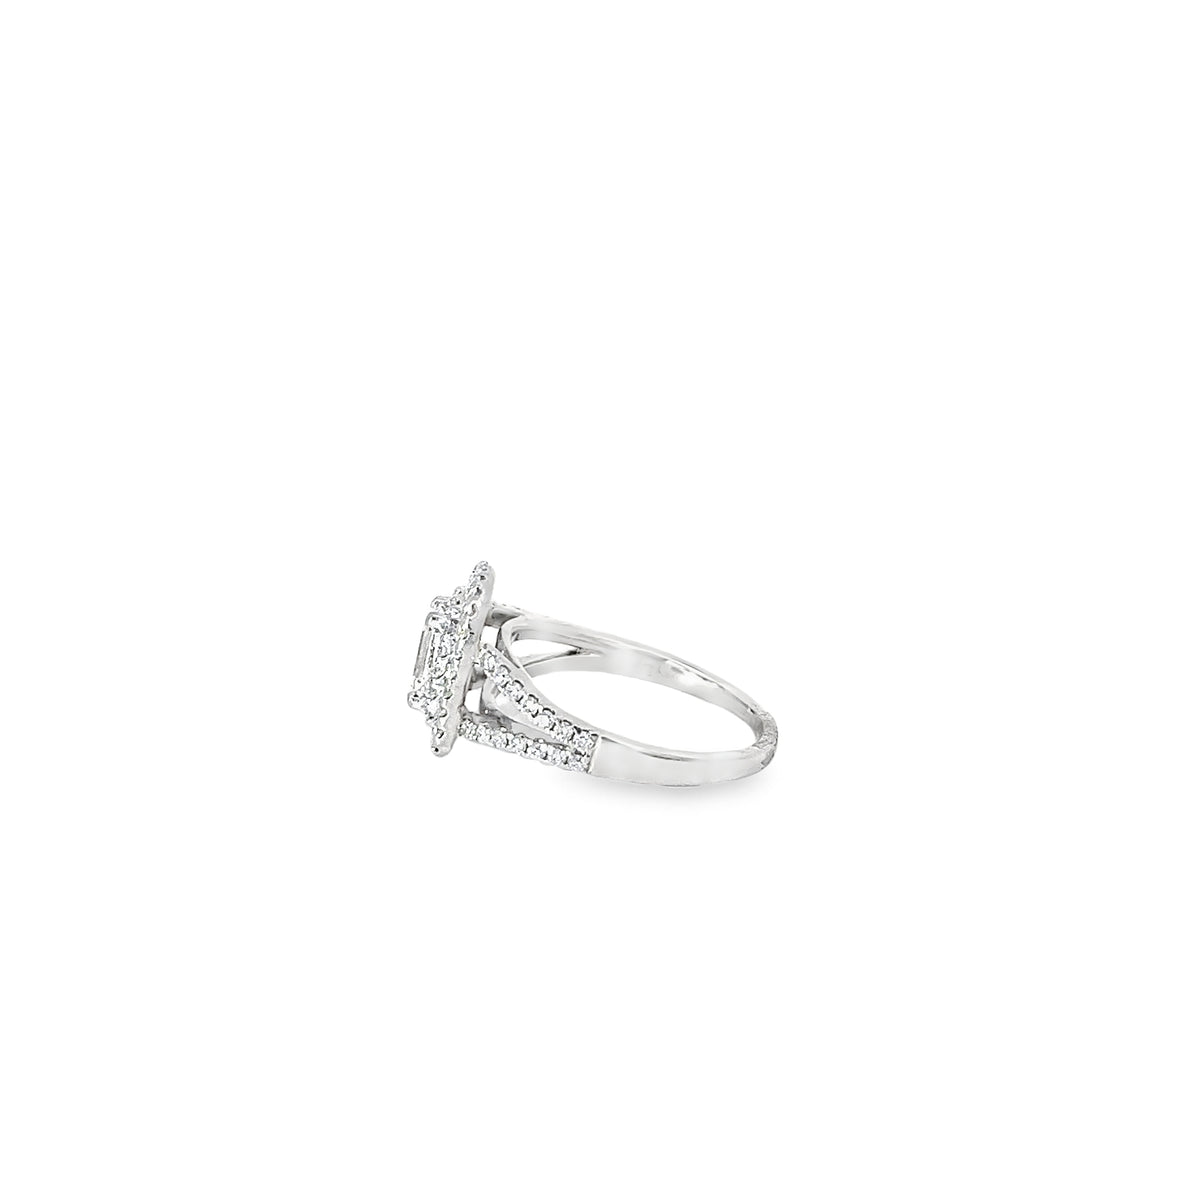 PLATINUM .70CT CENTER EMERALD CUT I VS2 AND .55CT G VS2 DOUBLE HALO SPLIT SHANK ENGAGEMENT RING